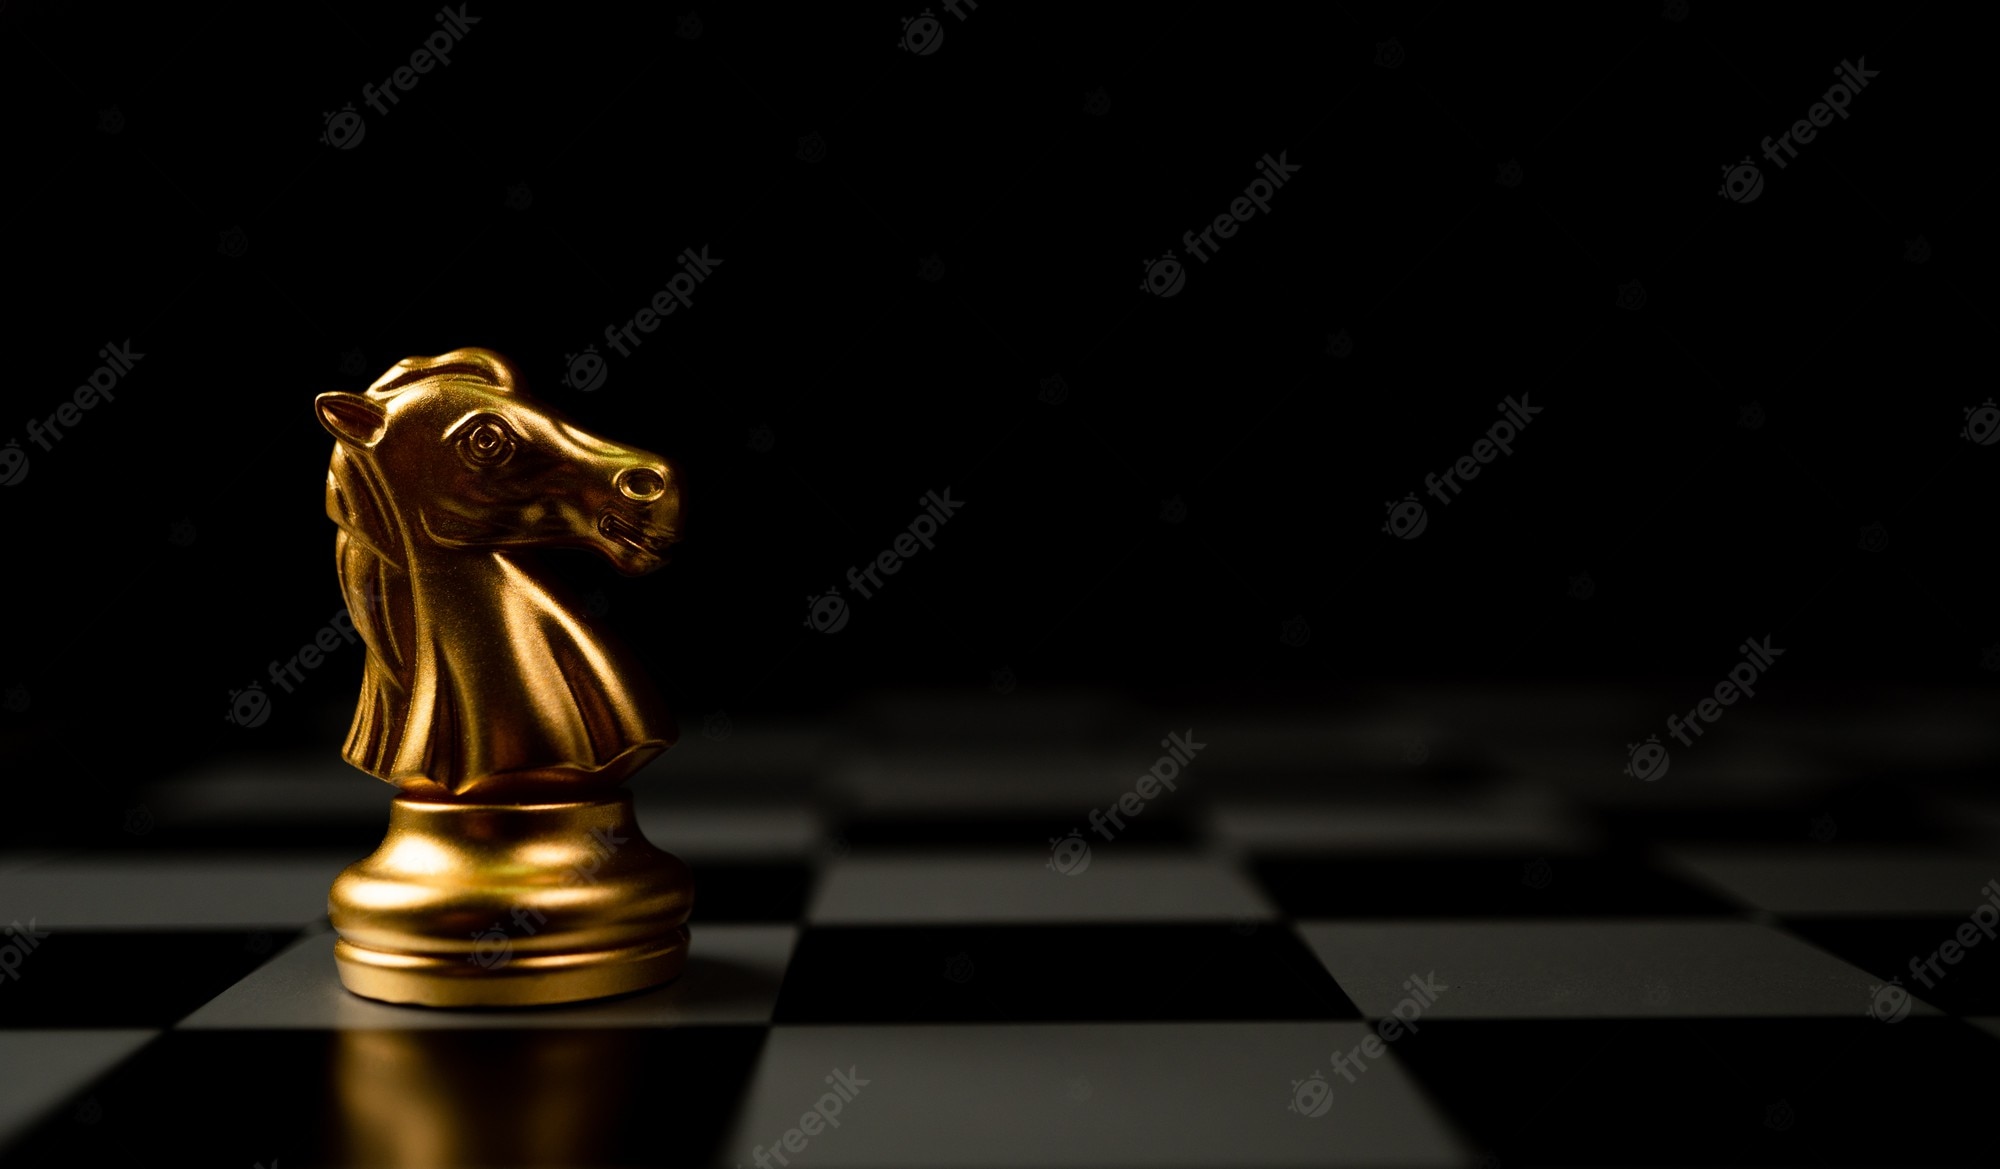 Premium Photo. Golden chess horse standing alone on the chessboard